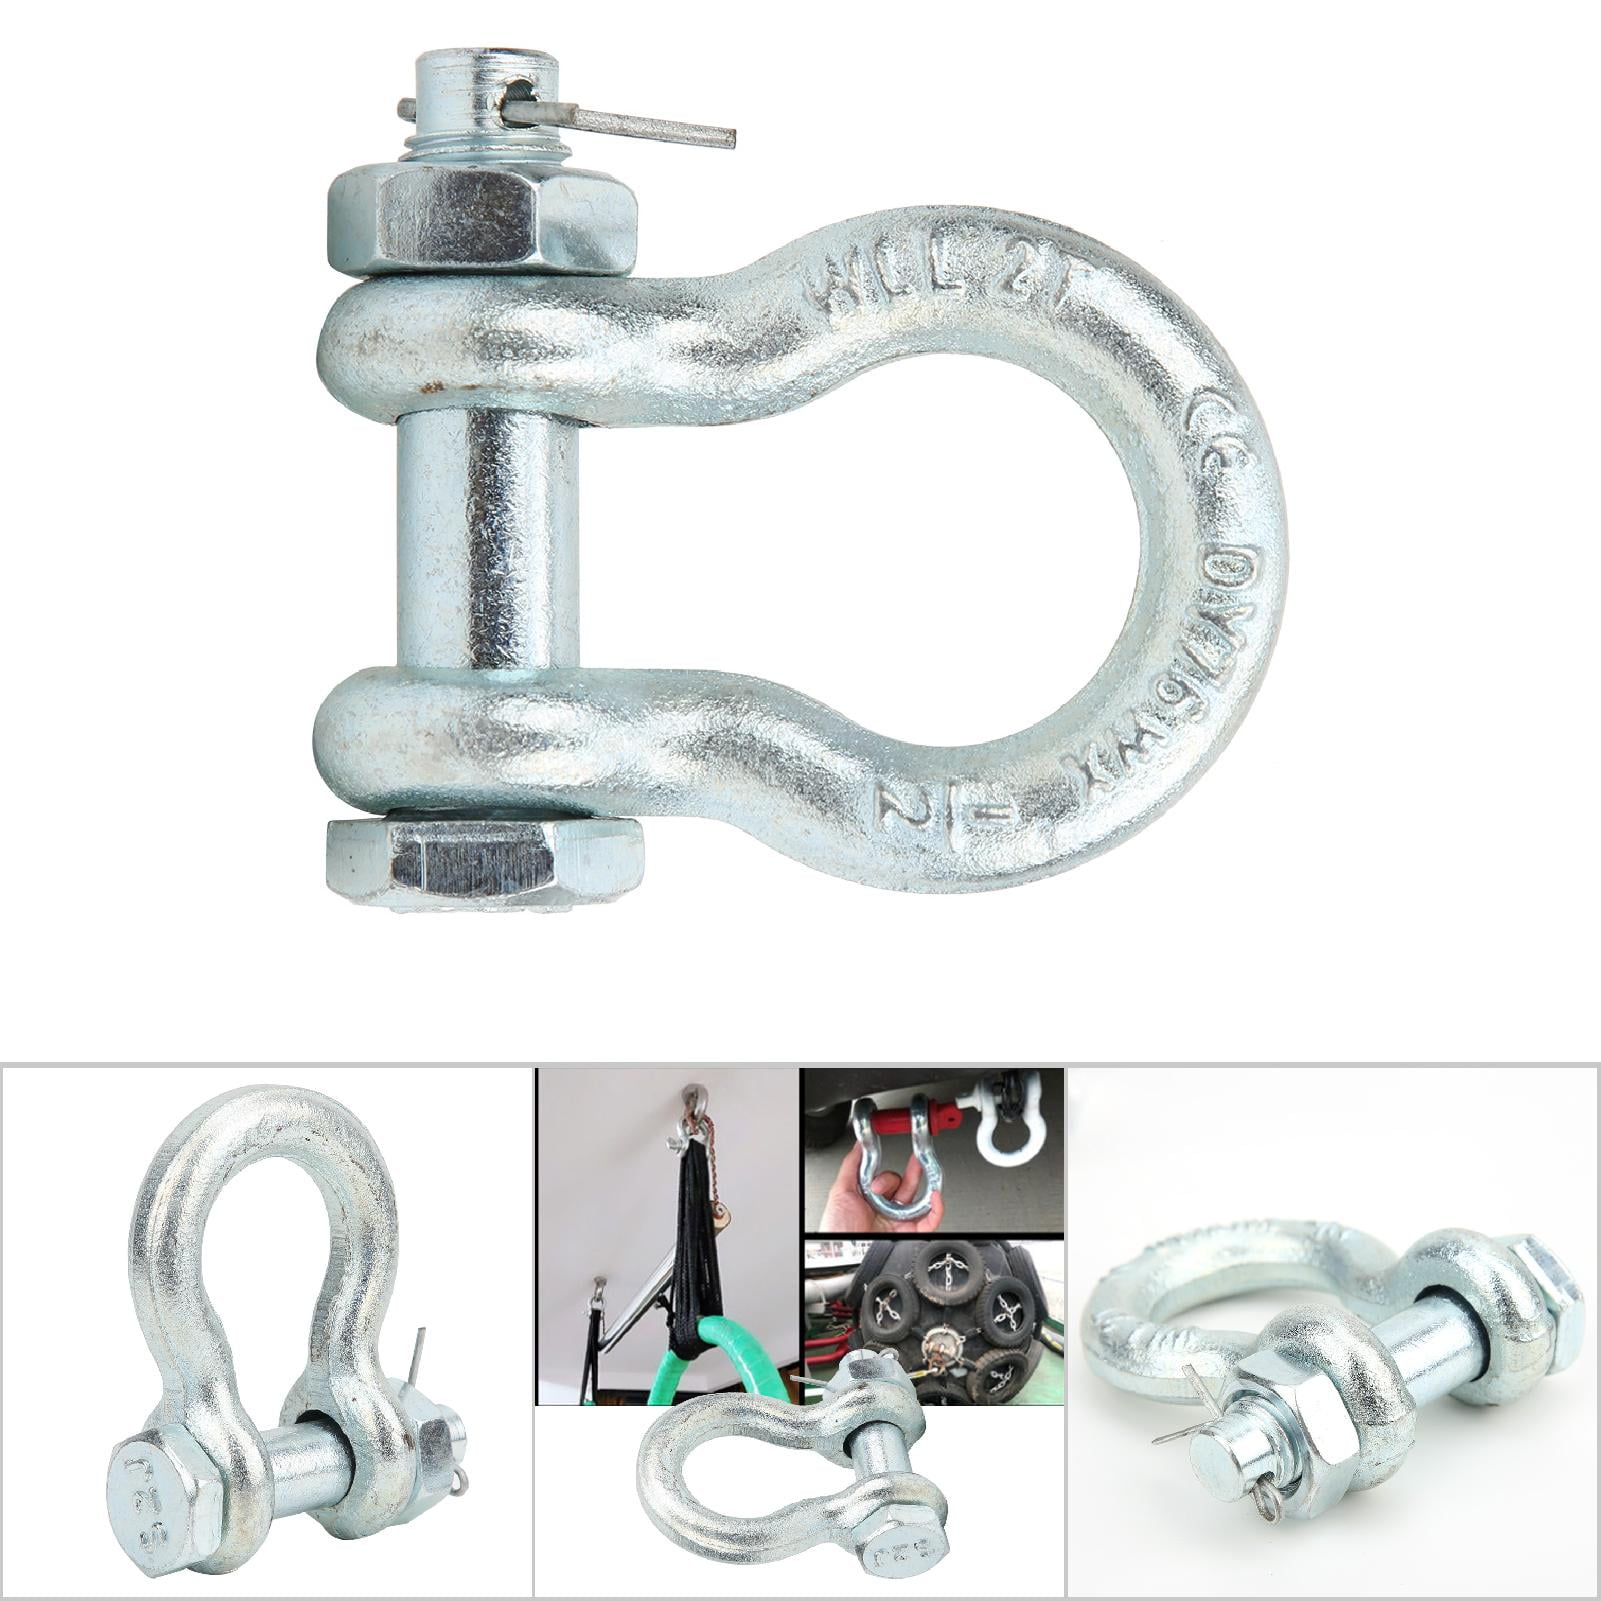 2T 2pcs G2130 Anchor Shackle Alloy Steel Heavy Duty Steel Bow Type with Nut Ship Lifting Machine Parts